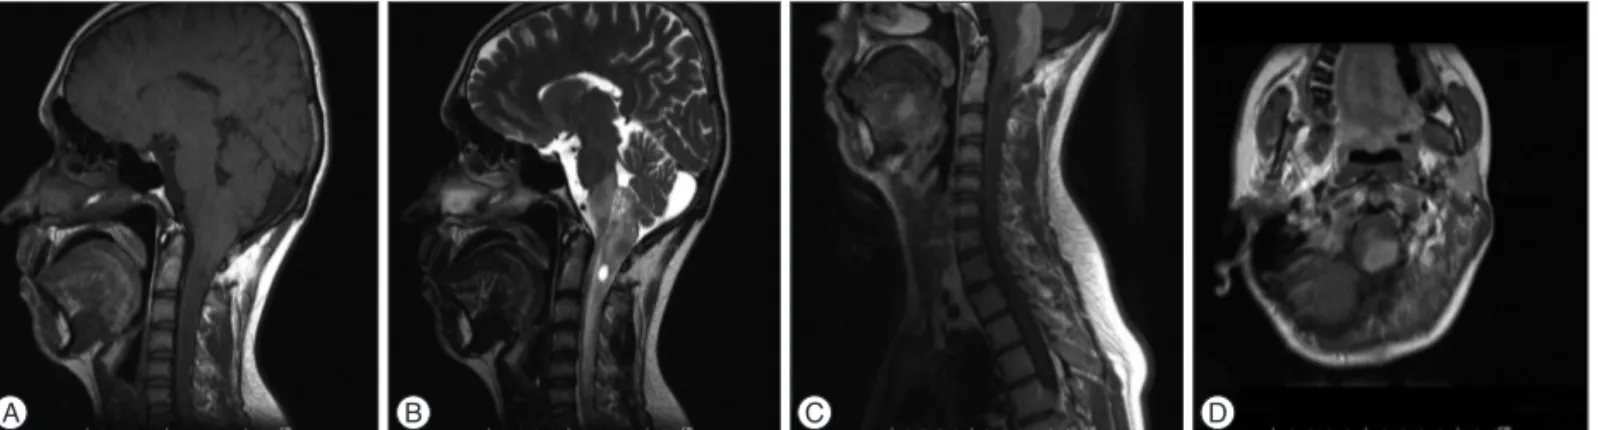 Fig. 1. Diffuse cord edema extending from medulla oblongata to C6 level and cystic component are seen on sagittal T1 (A) and T2 (B) weighted MR  images